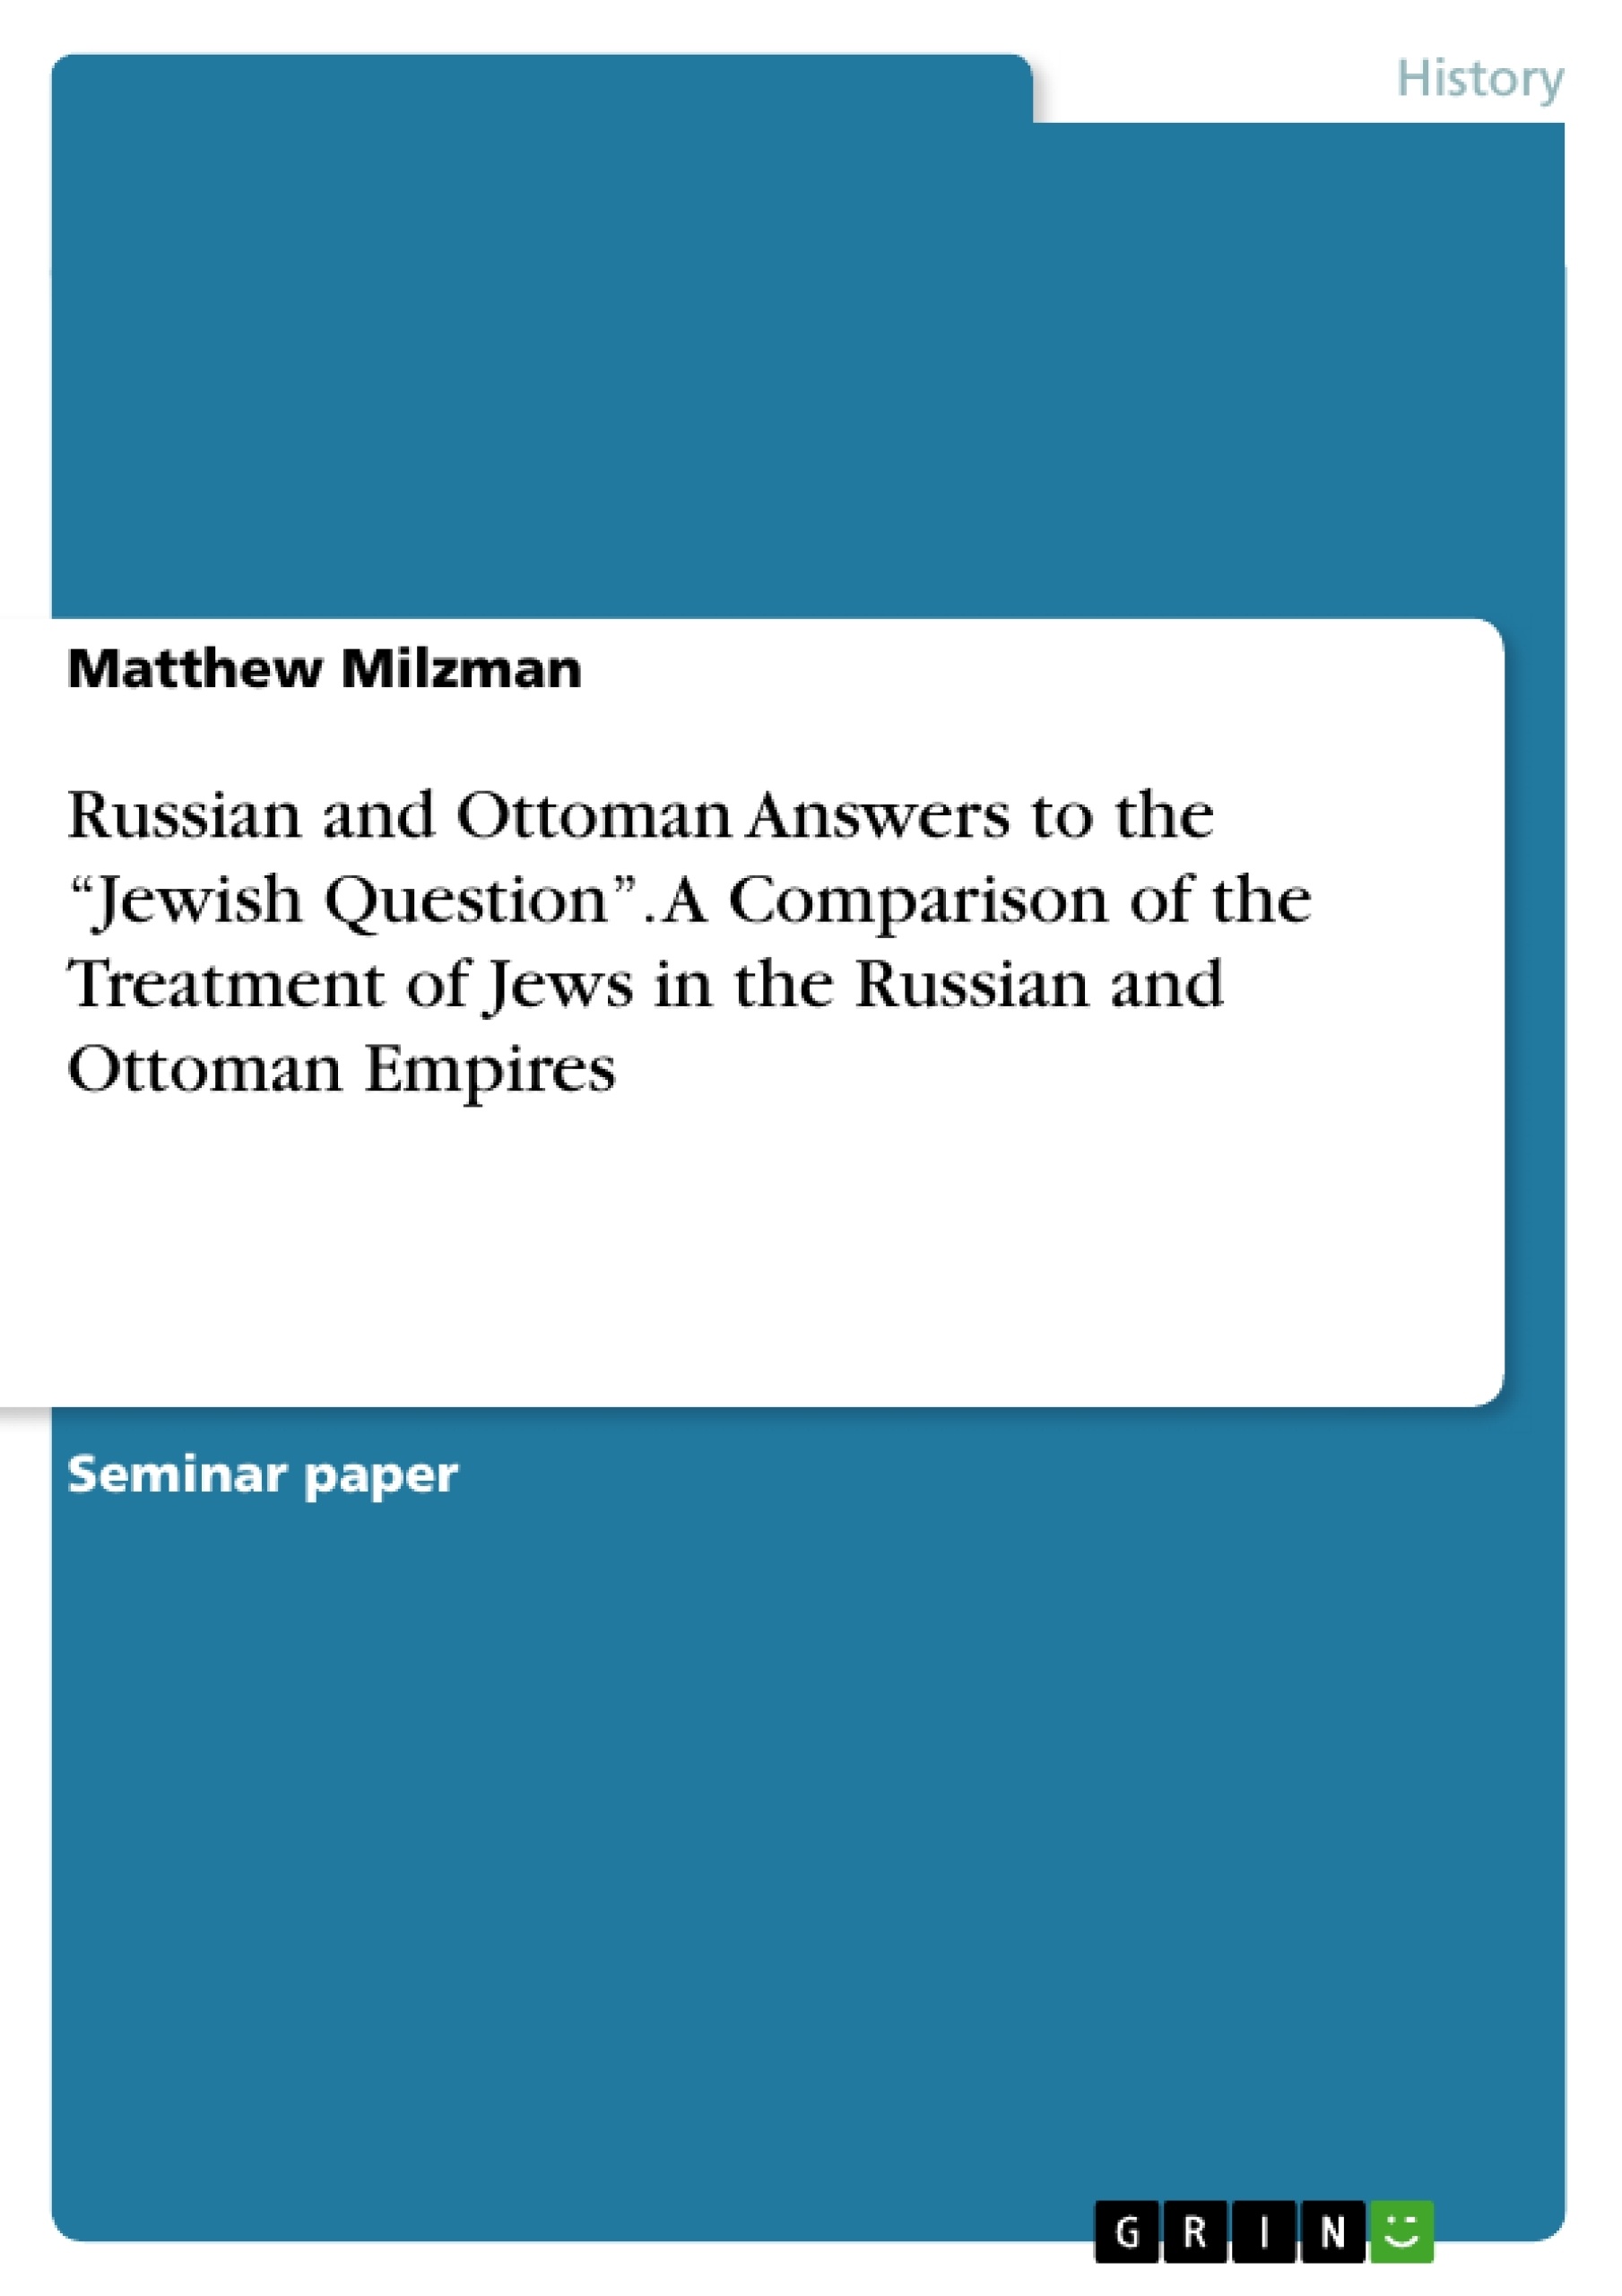 Título: Russian and Ottoman Answers to the “Jewish Question”. A Comparison of the Treatment of Jews in the Russian and Ottoman Empires